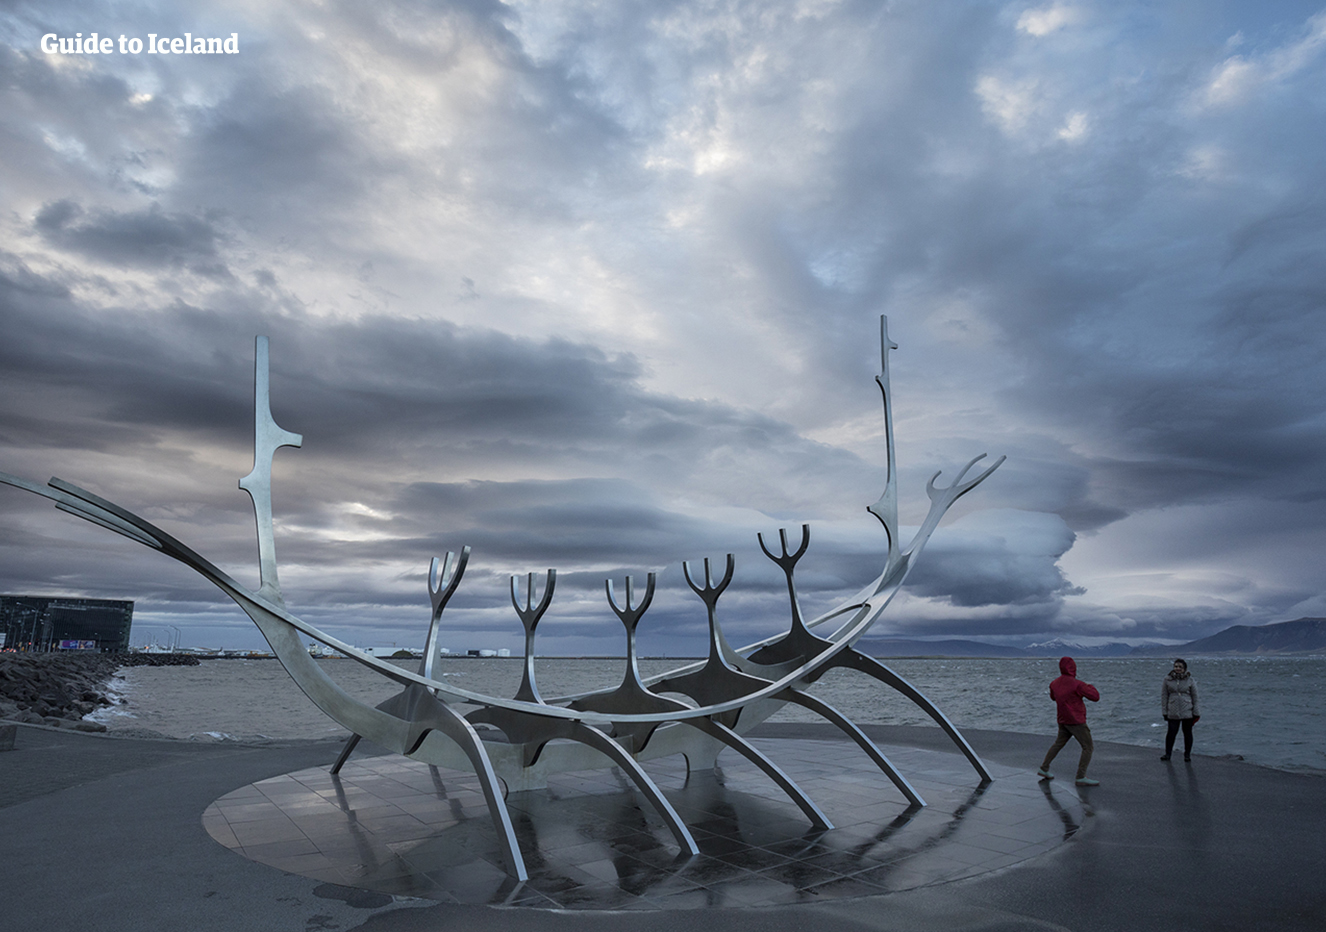 The Sun Voyager looks out across Faxafloi Bay.